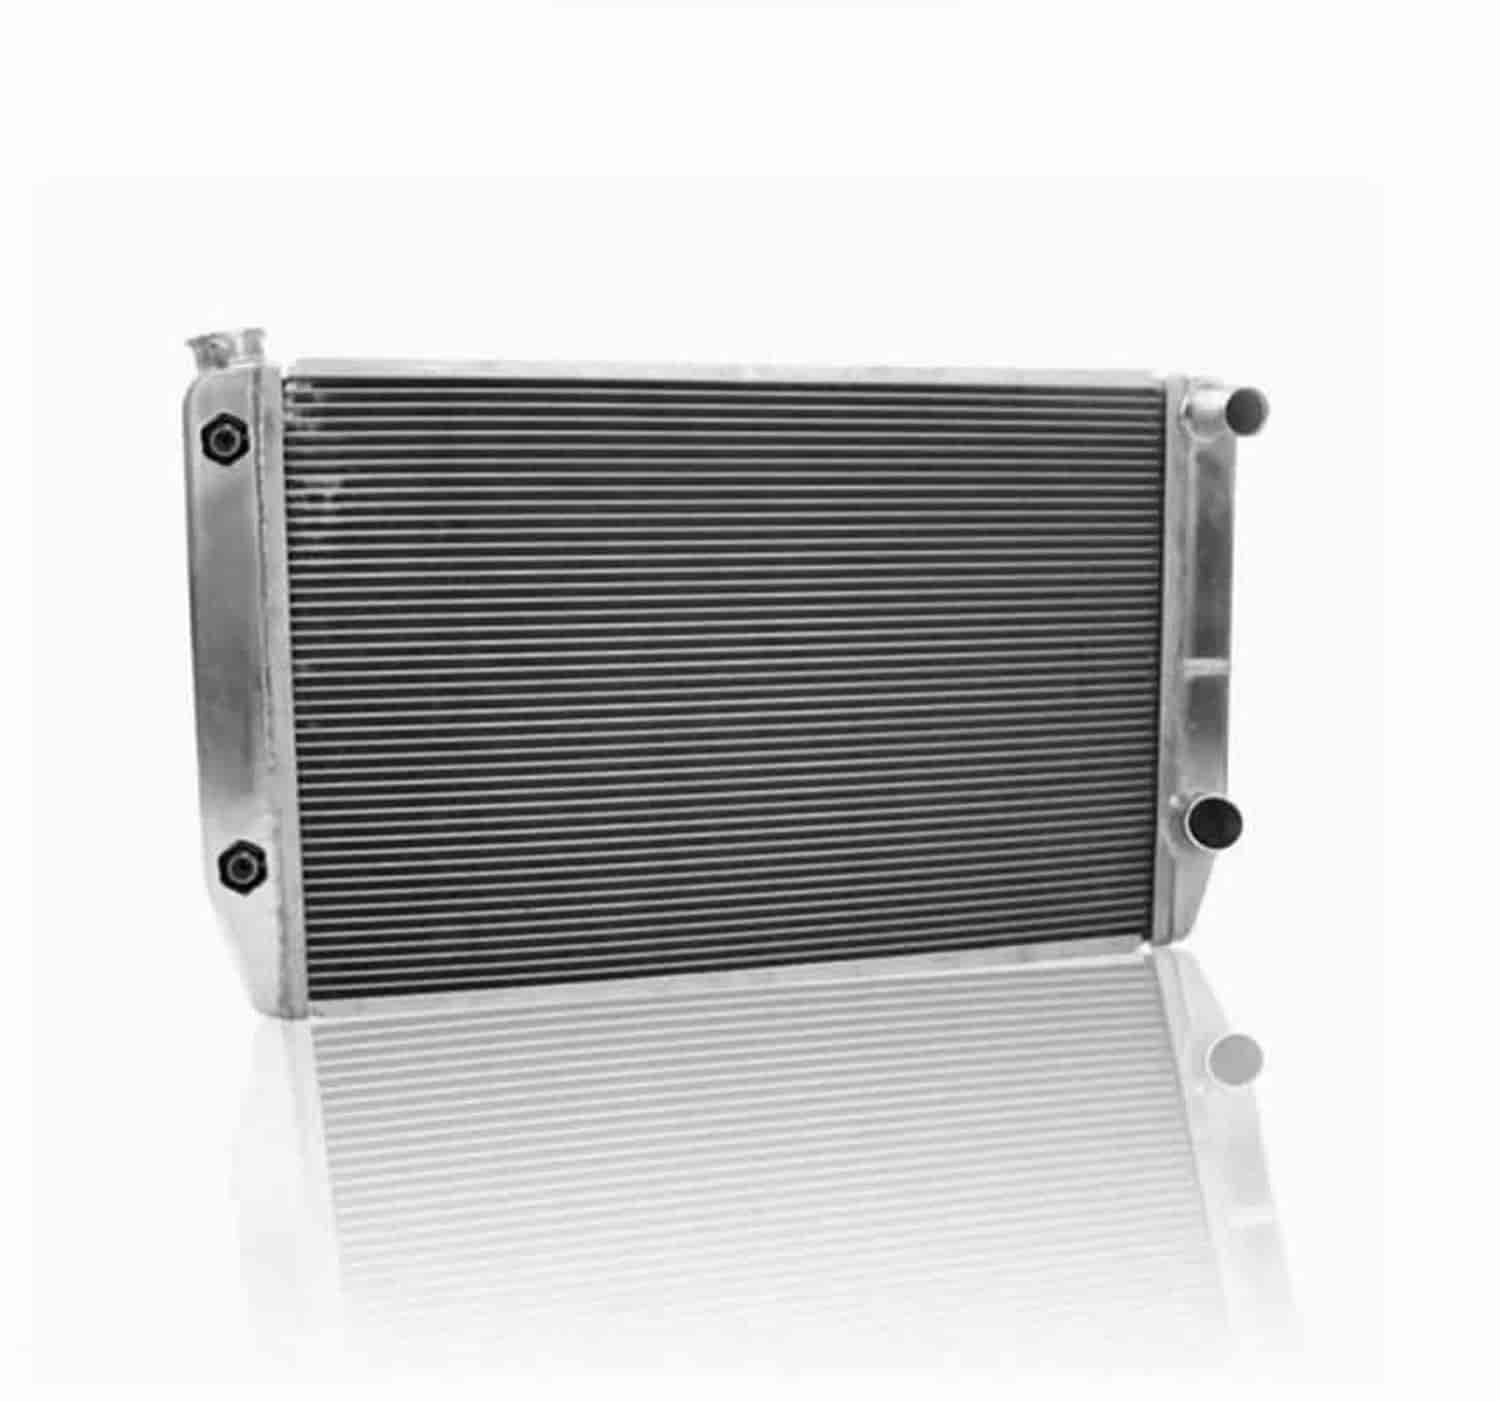 MegaCool Universal Fit Radiator Dual Pass Crossflow Design 27.50" x 15.50" with Transmission Cooler